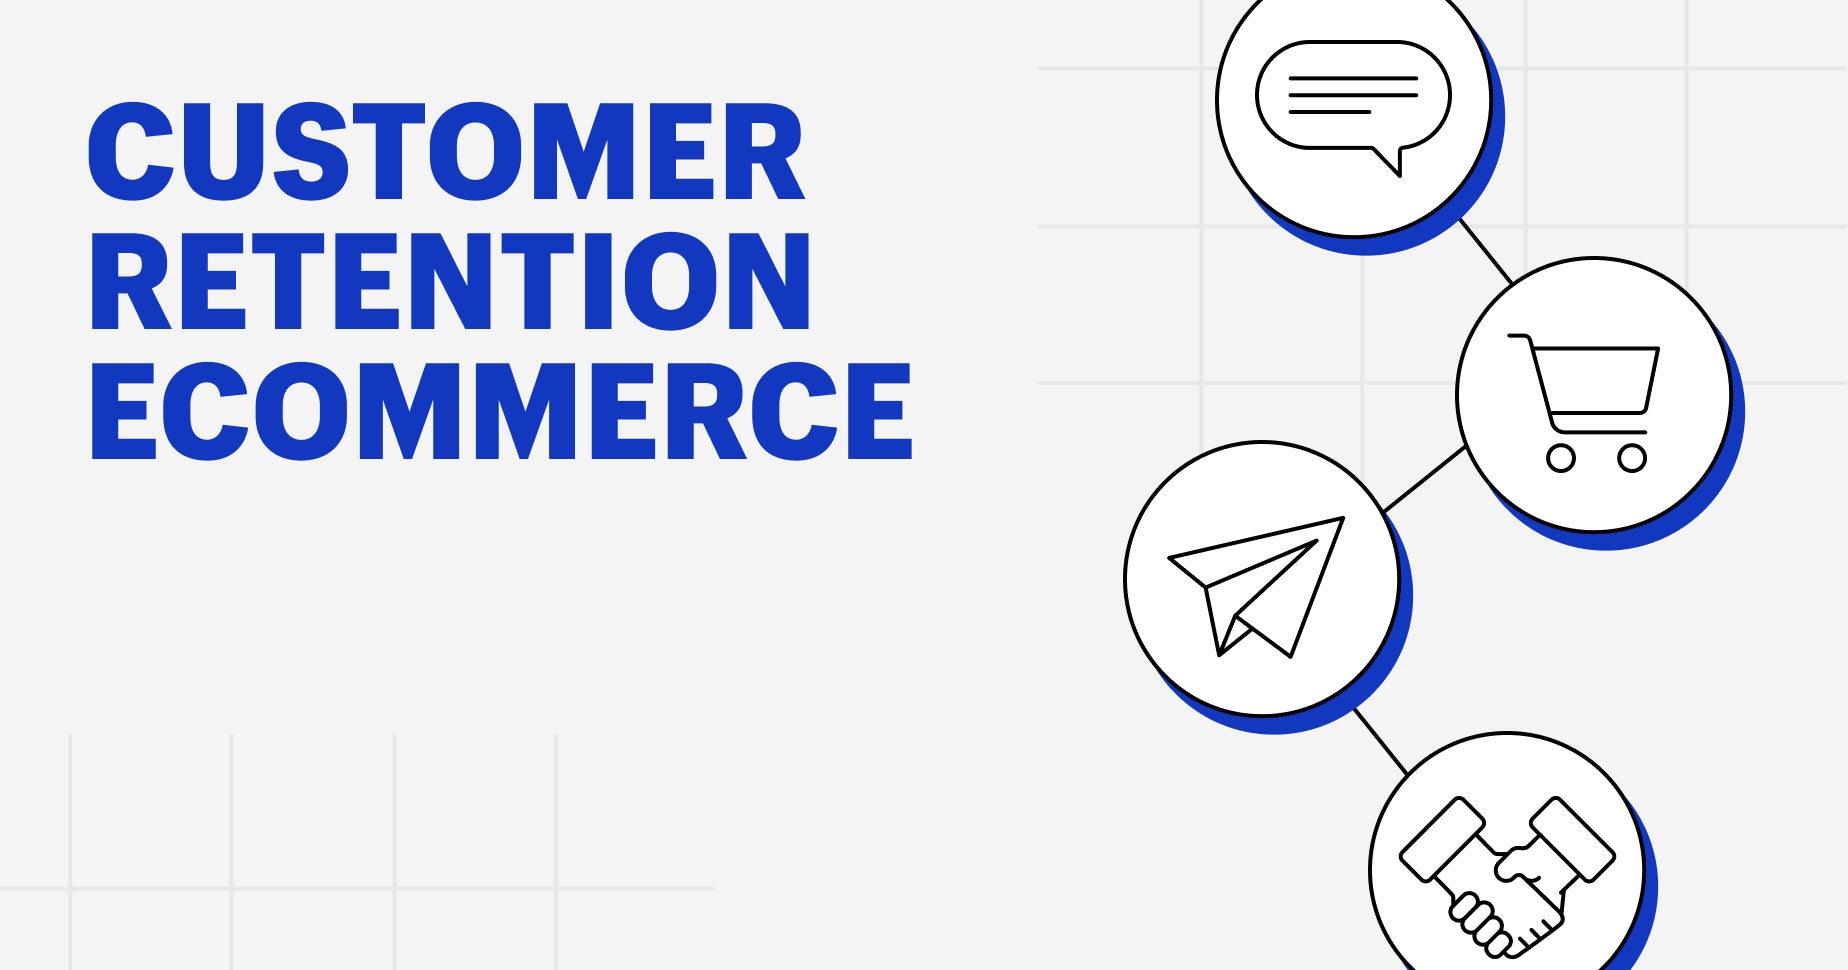 A light gray background with bright blue text that says "customer retention ecommerce" accompanied by vector images including a send button, chat bubble, and shopping cart